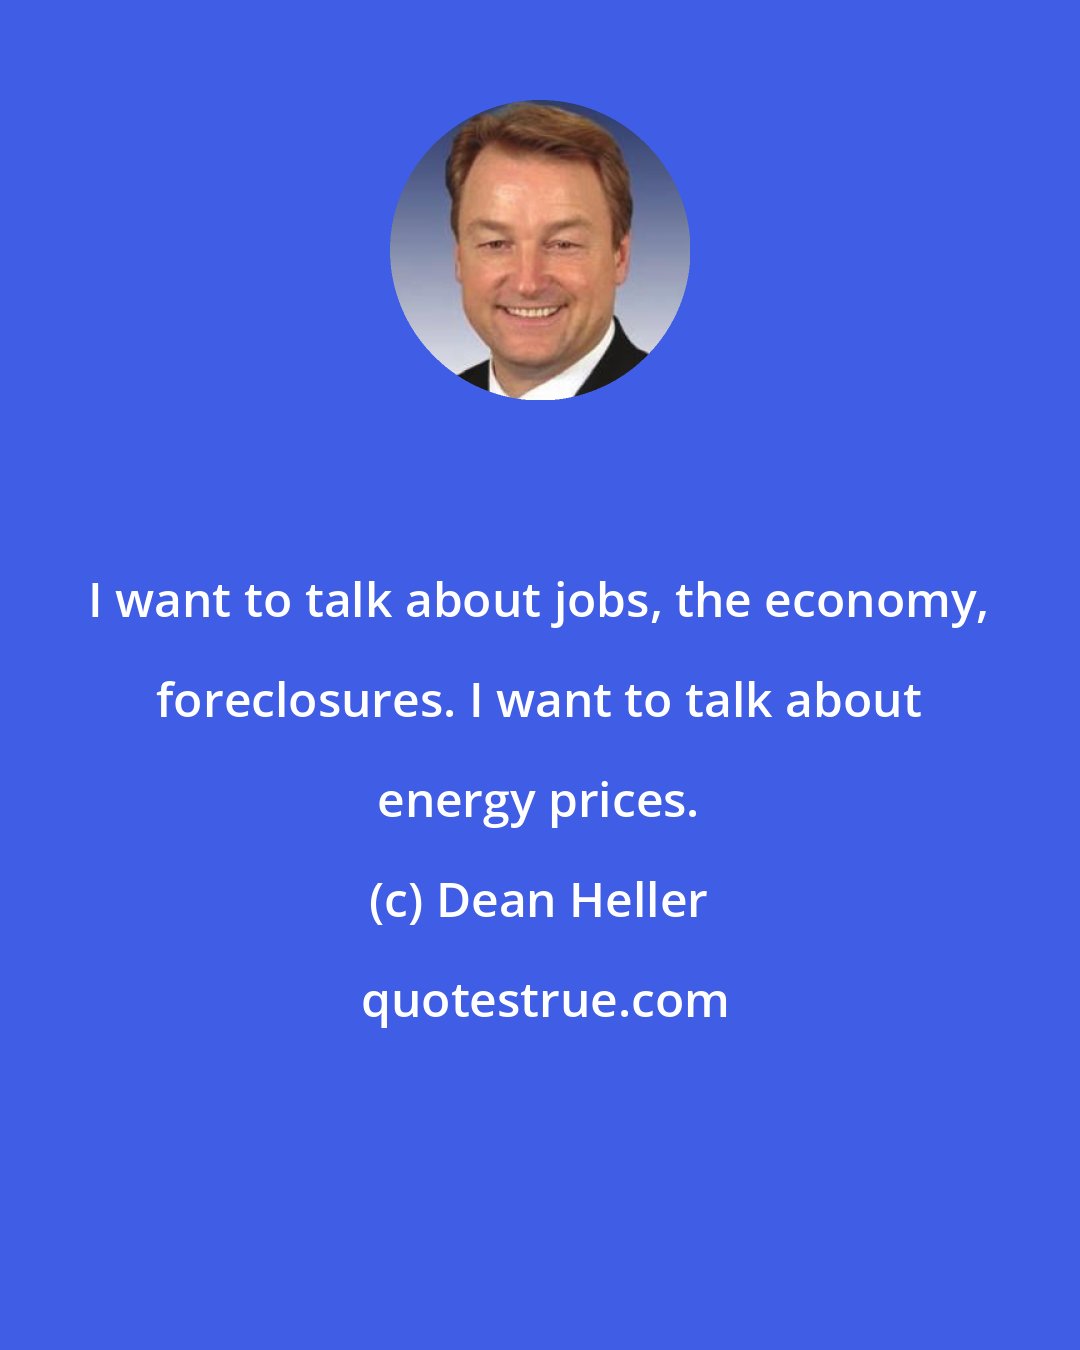 Dean Heller: I want to talk about jobs, the economy, foreclosures. I want to talk about energy prices.